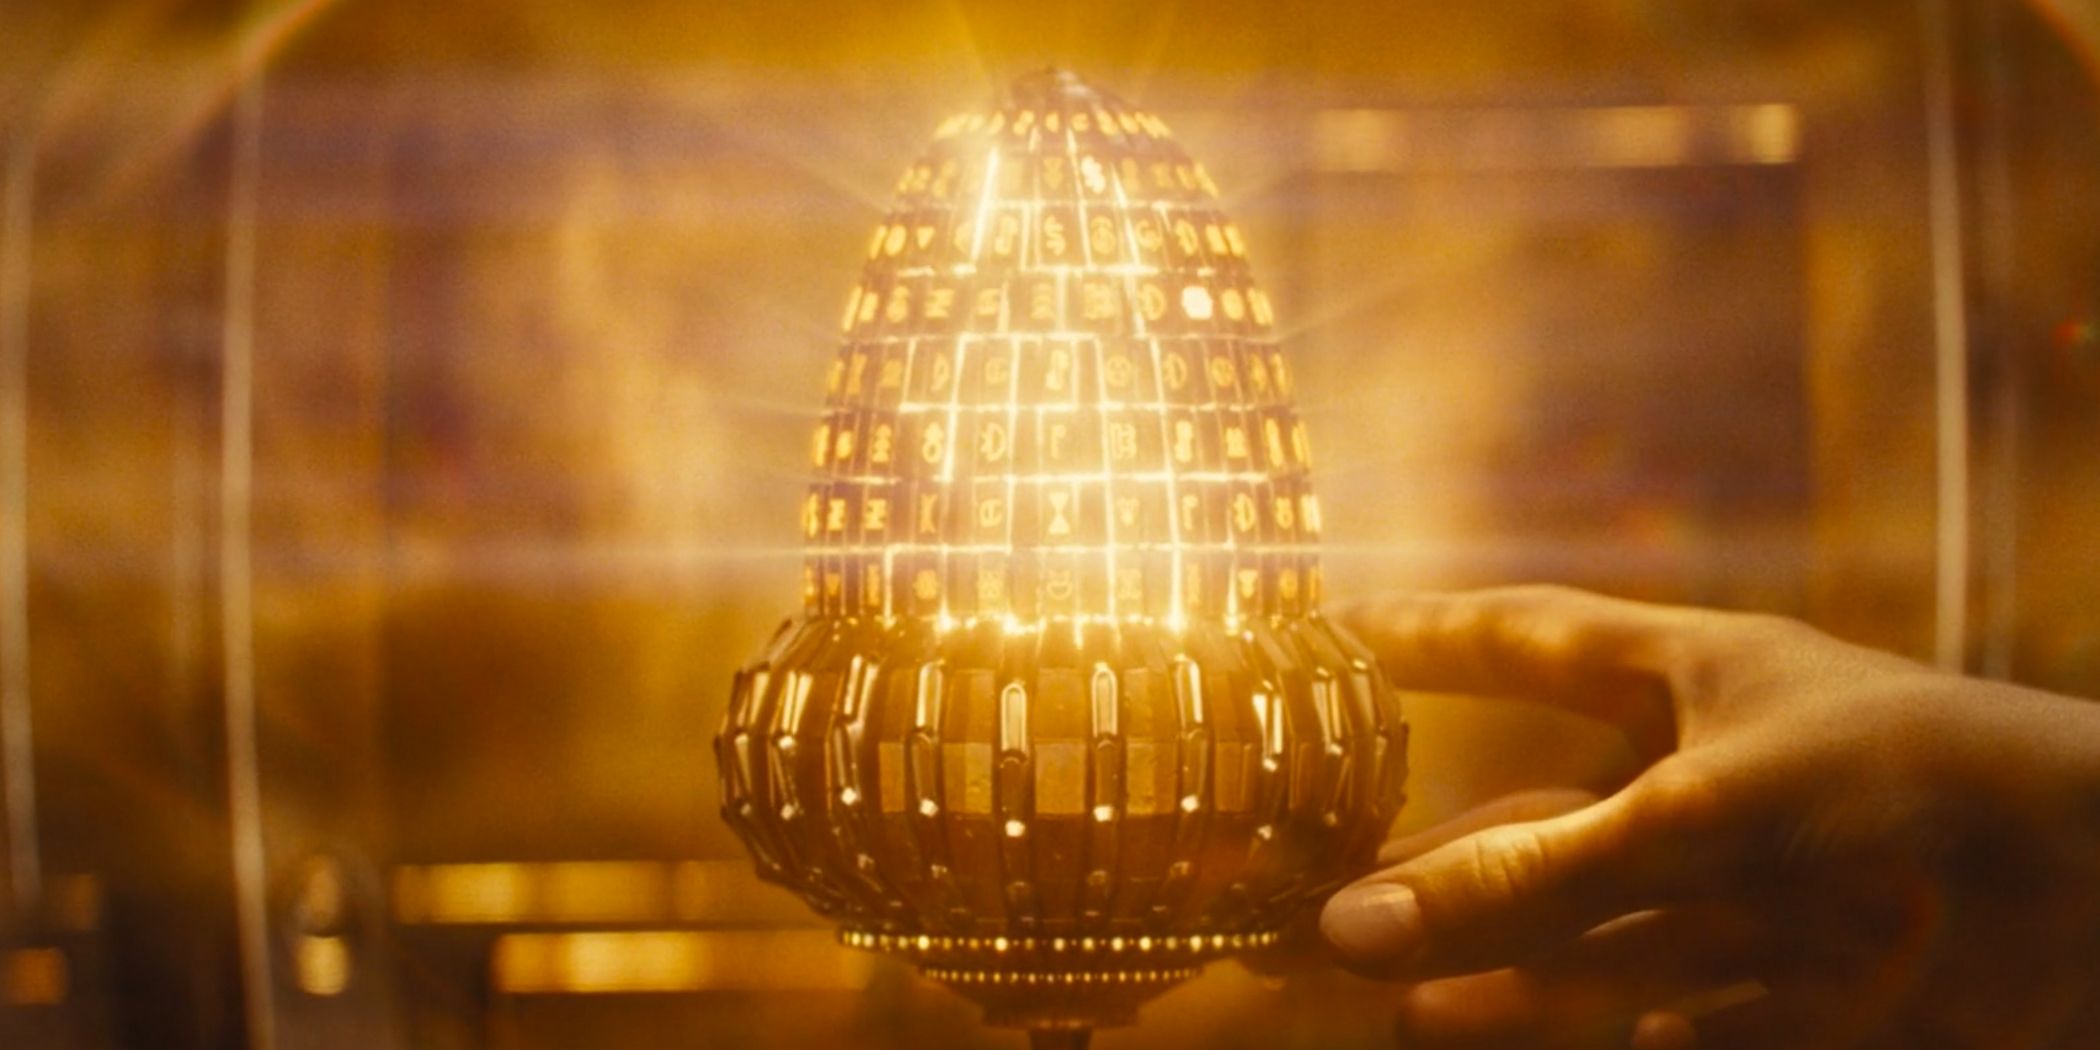 The Aculos, which looks like an upside-down golden acorn covered in runes.